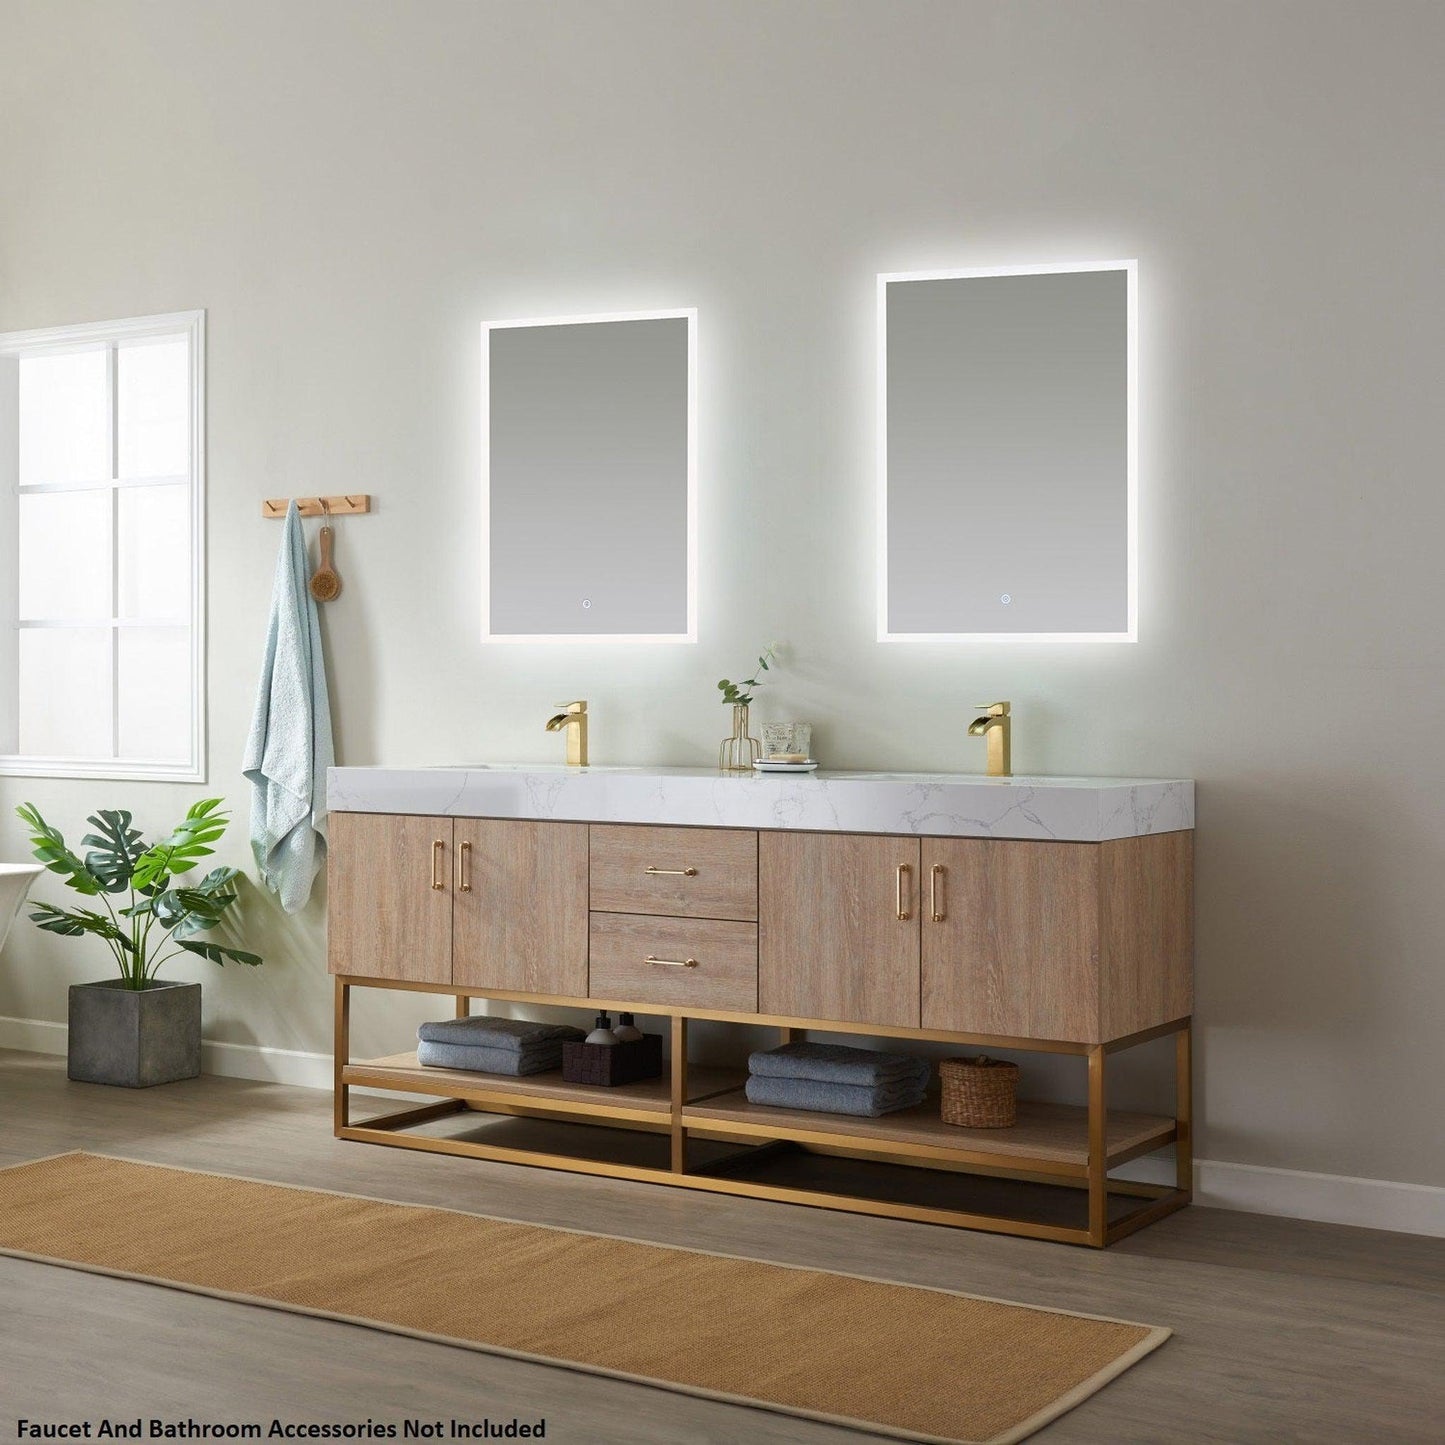 Vinnova Alistair 72" North American Oak Freestanding Double Vanity Set In Brushed Gold Metal Bracket Support Base and White Grain Stone Top With Undermount Ceramic Sink and Mirror